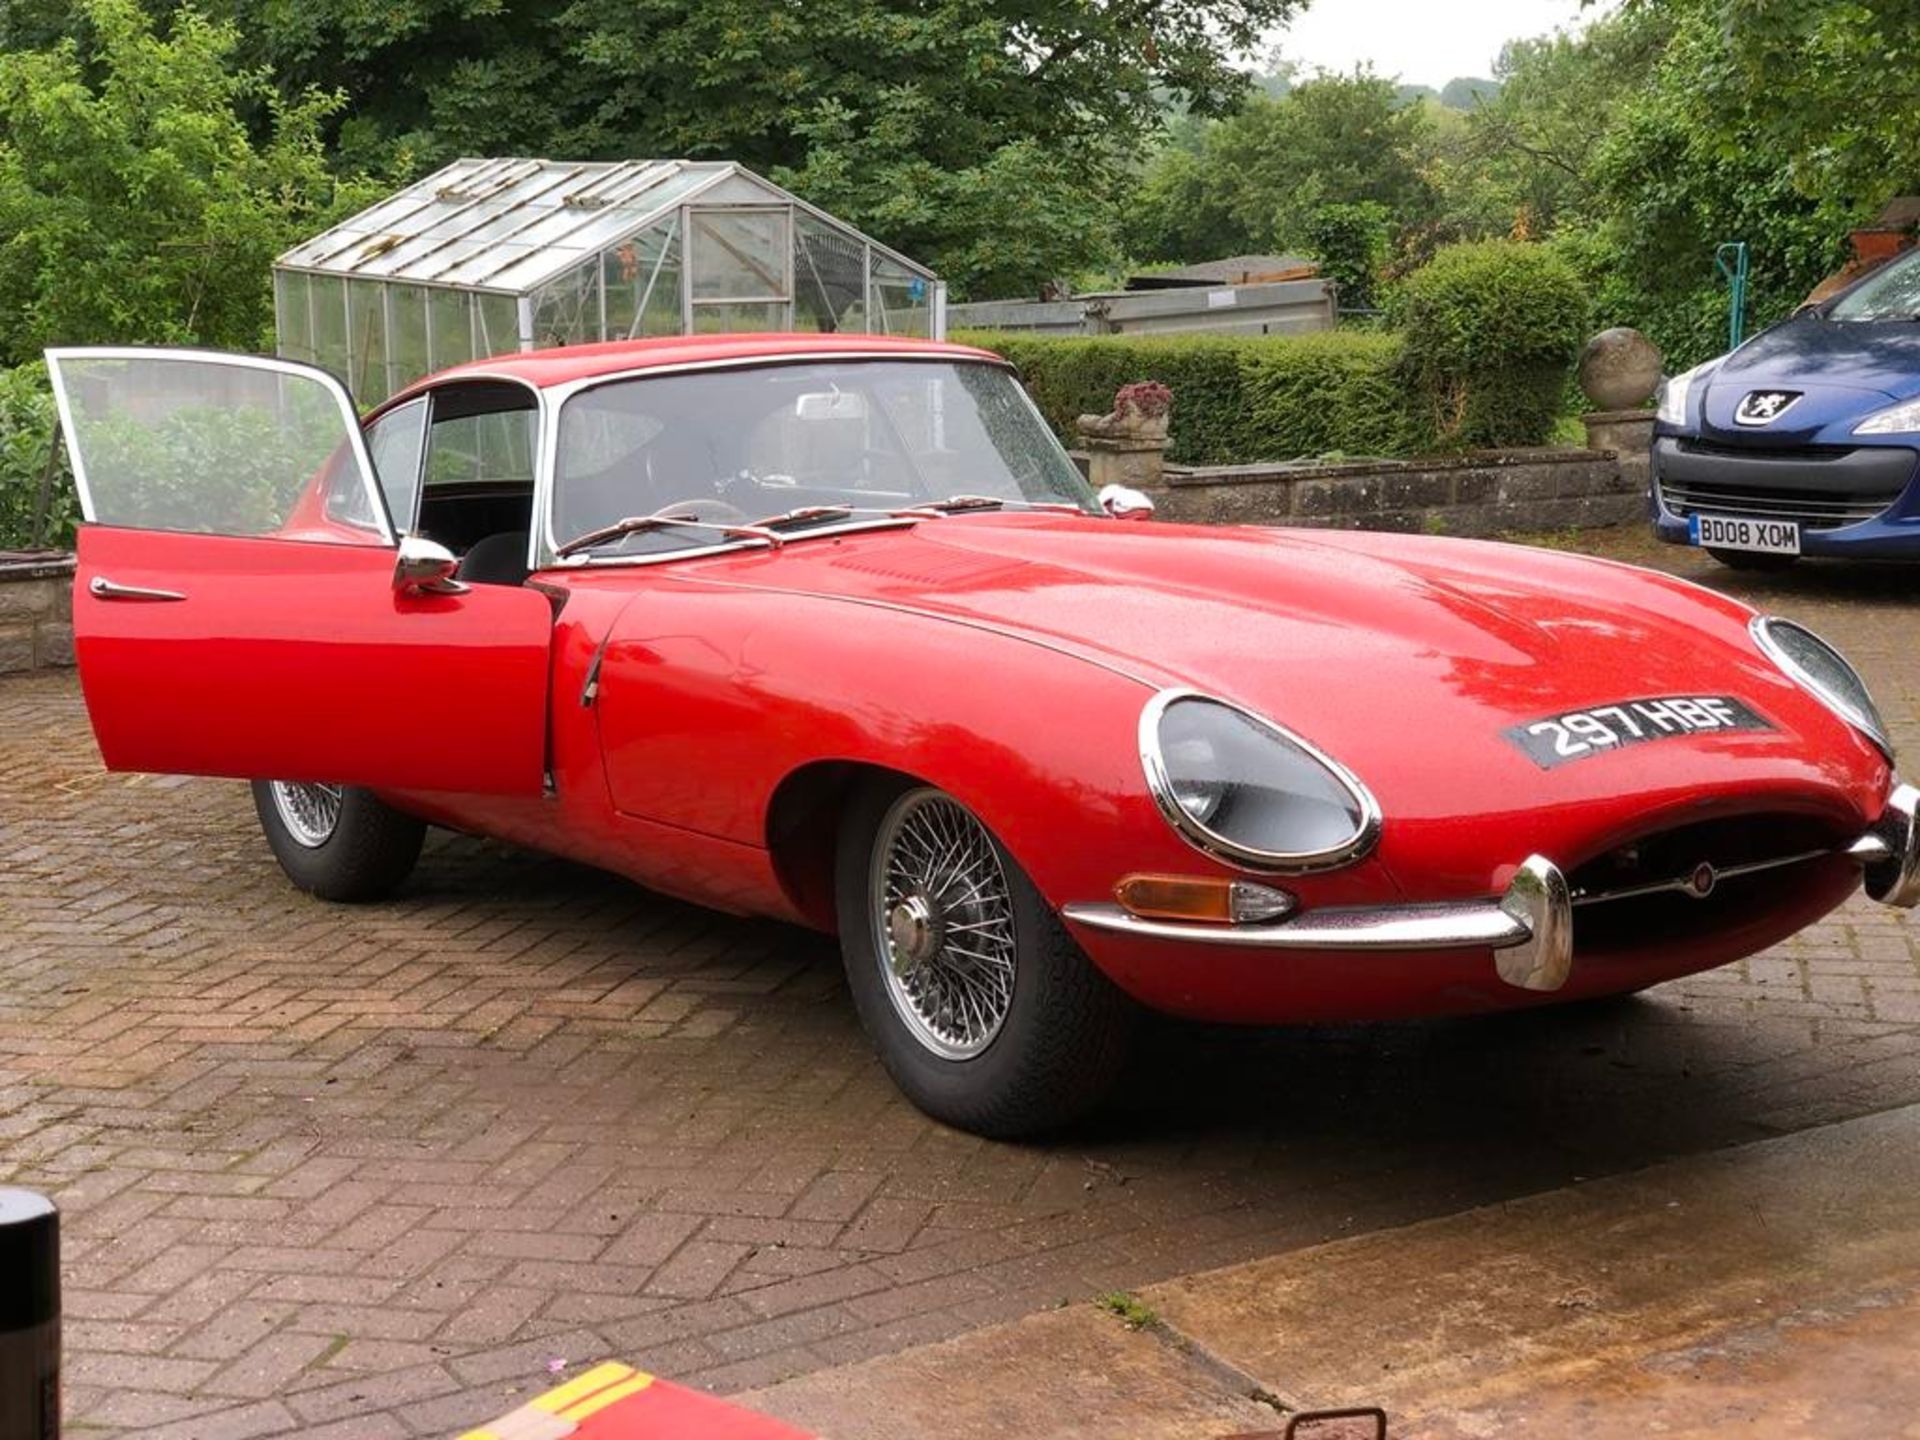 1962 Jaguar E-Type 3.8 Fixed Head Coupé Registration number 297 HBF Chassis number 860773 Engine - Image 112 of 160